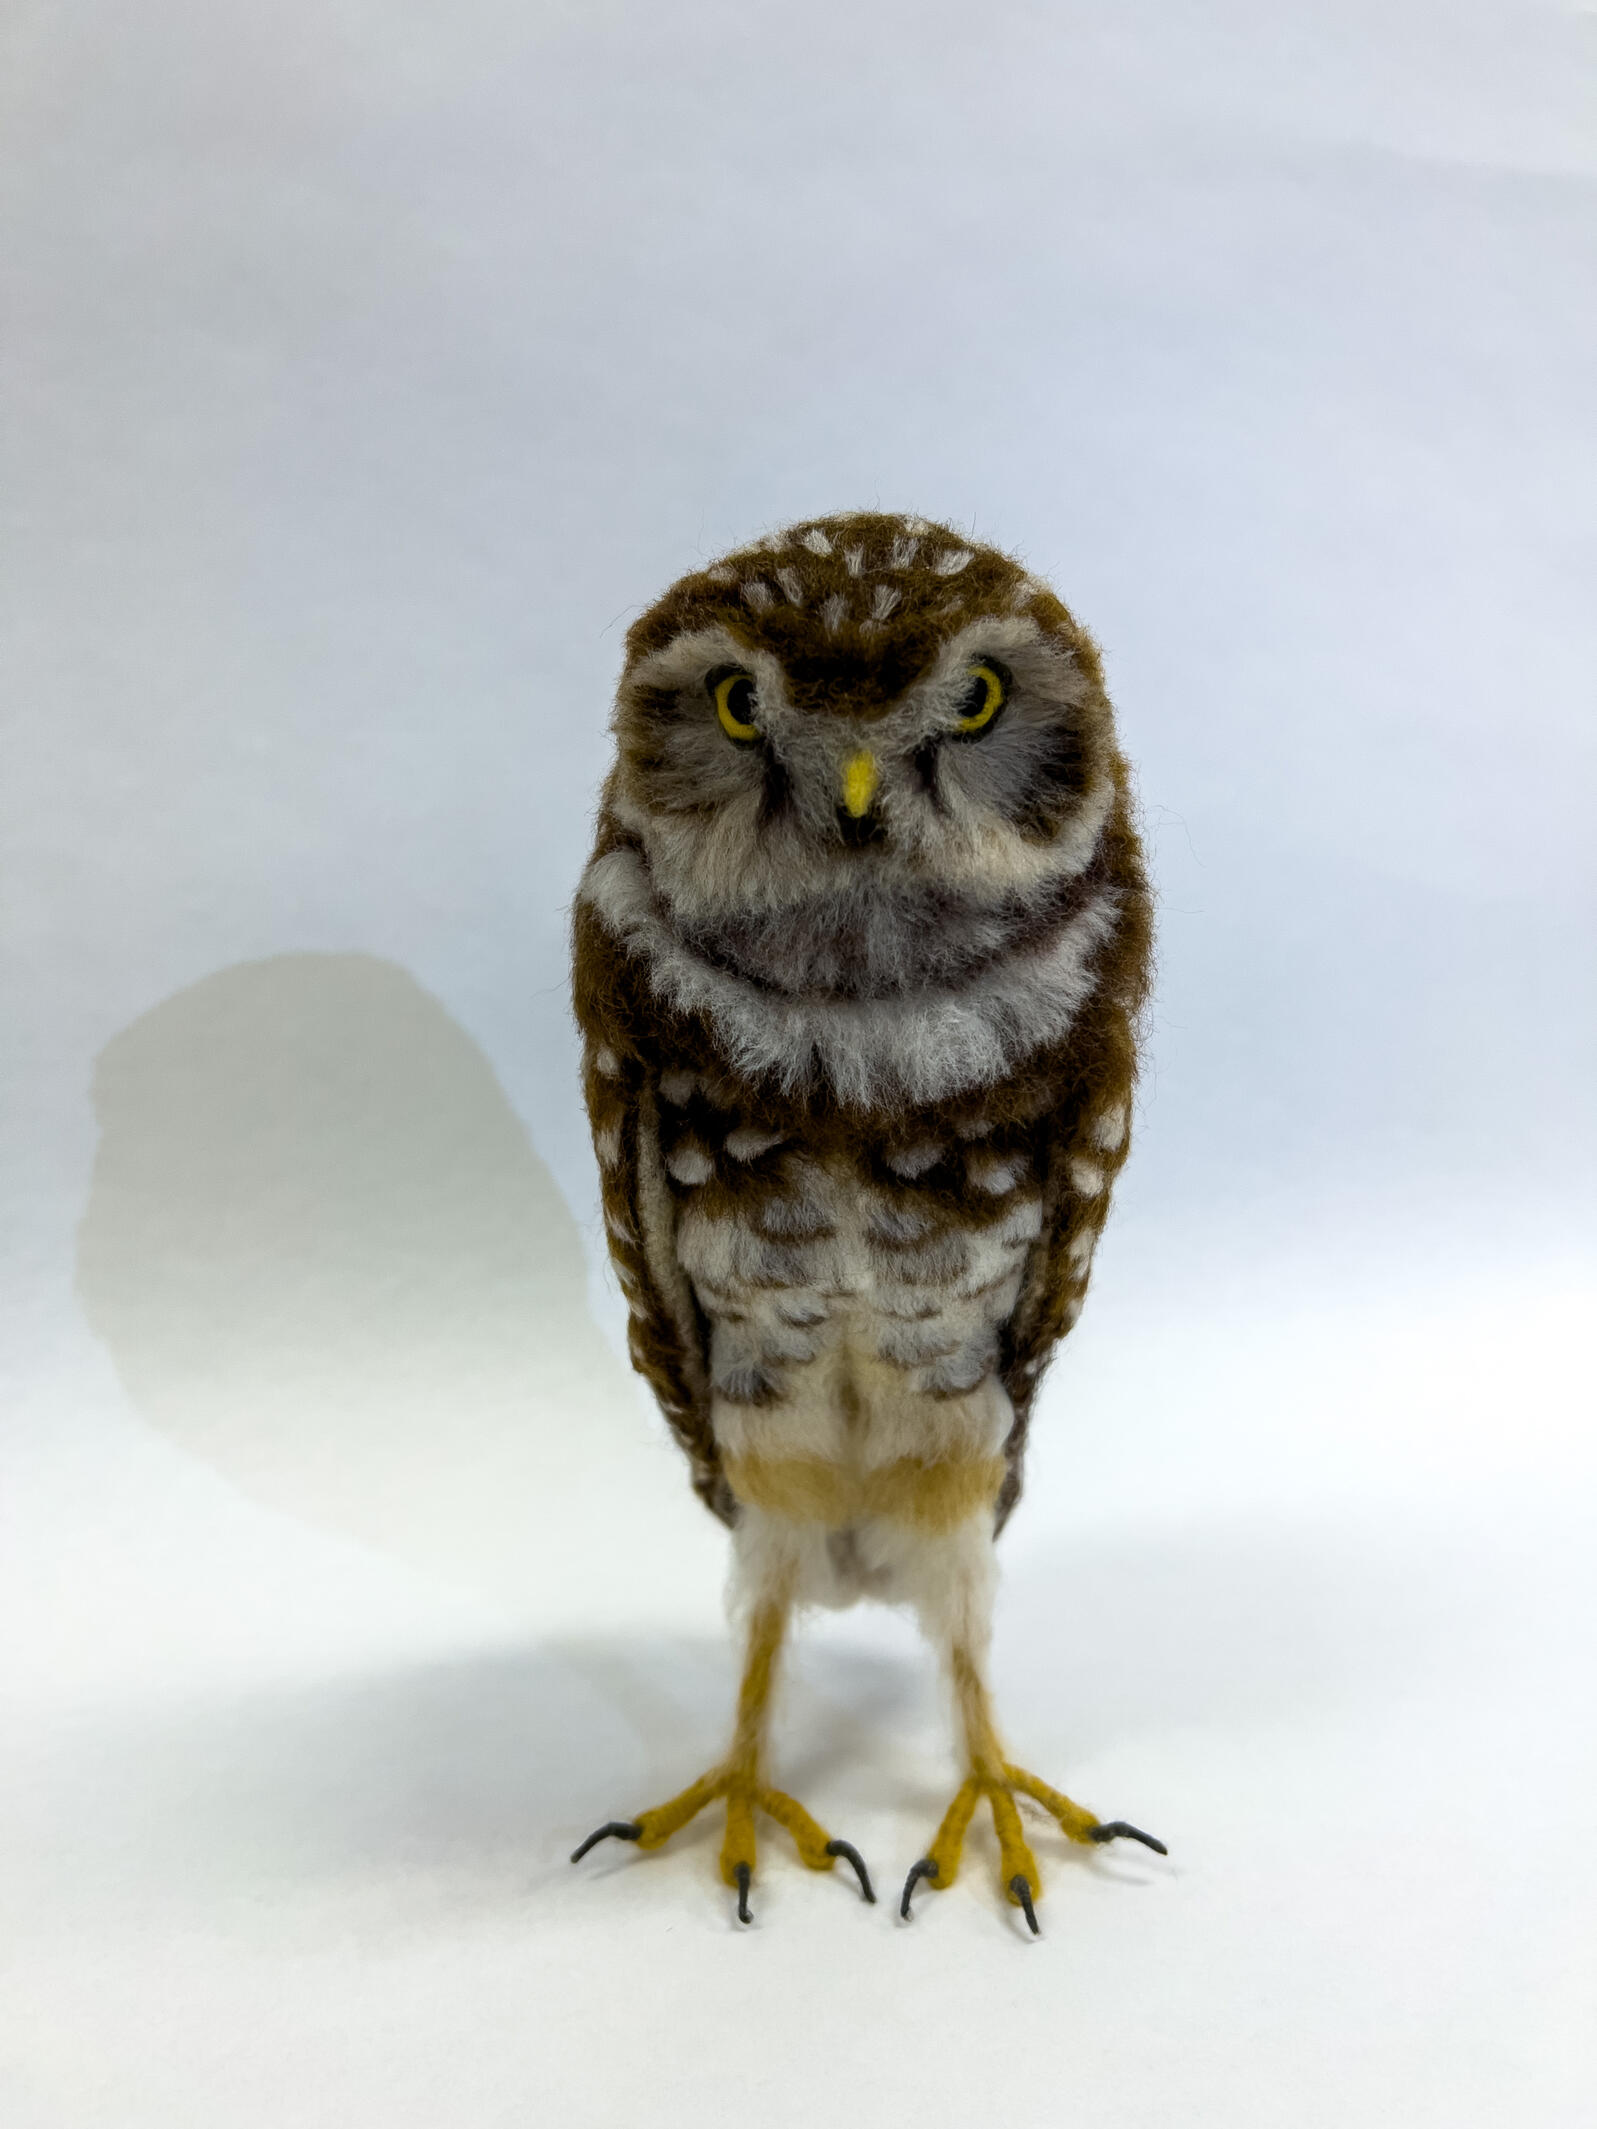 Burrowing Owl sculpture made of wool against a white background